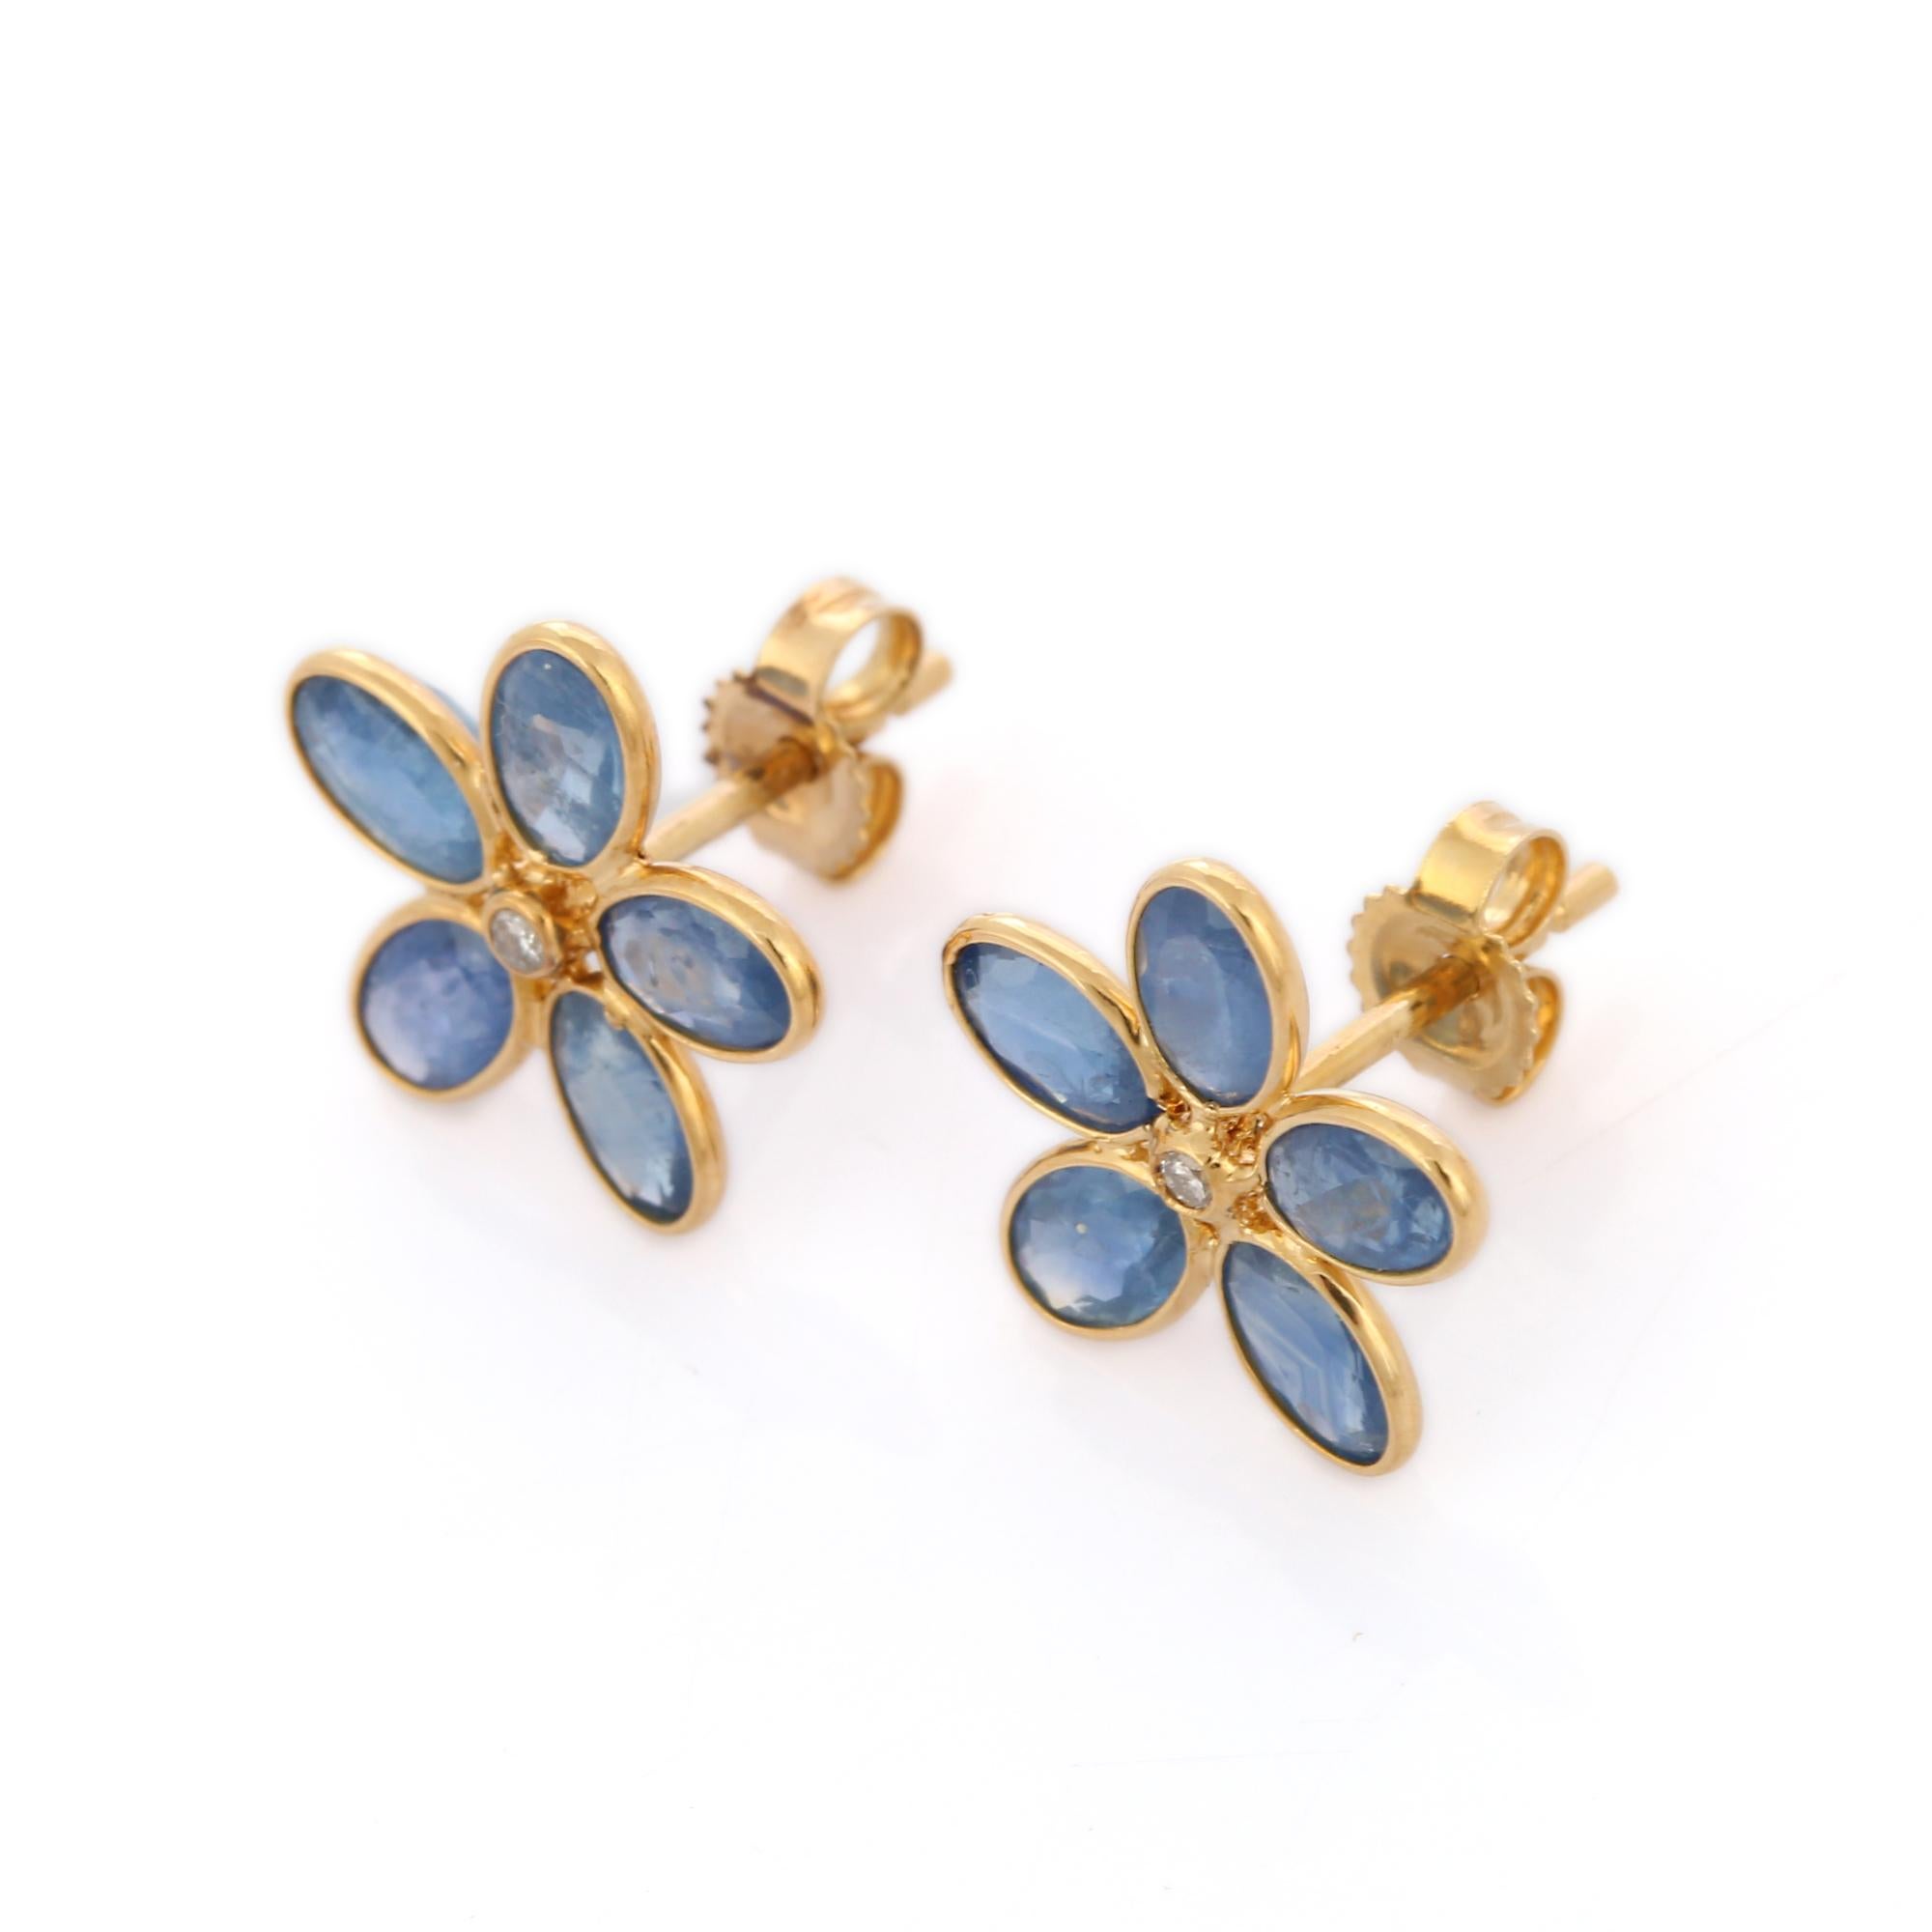 Floral blue sapphire studs in 18K gold create a subtle beauty while showcasing the colors of the natural precious gemstones and illuminating diamonds making a statement.
These beautiful earrings are made from 10 oval shaped sapphires perfectly set